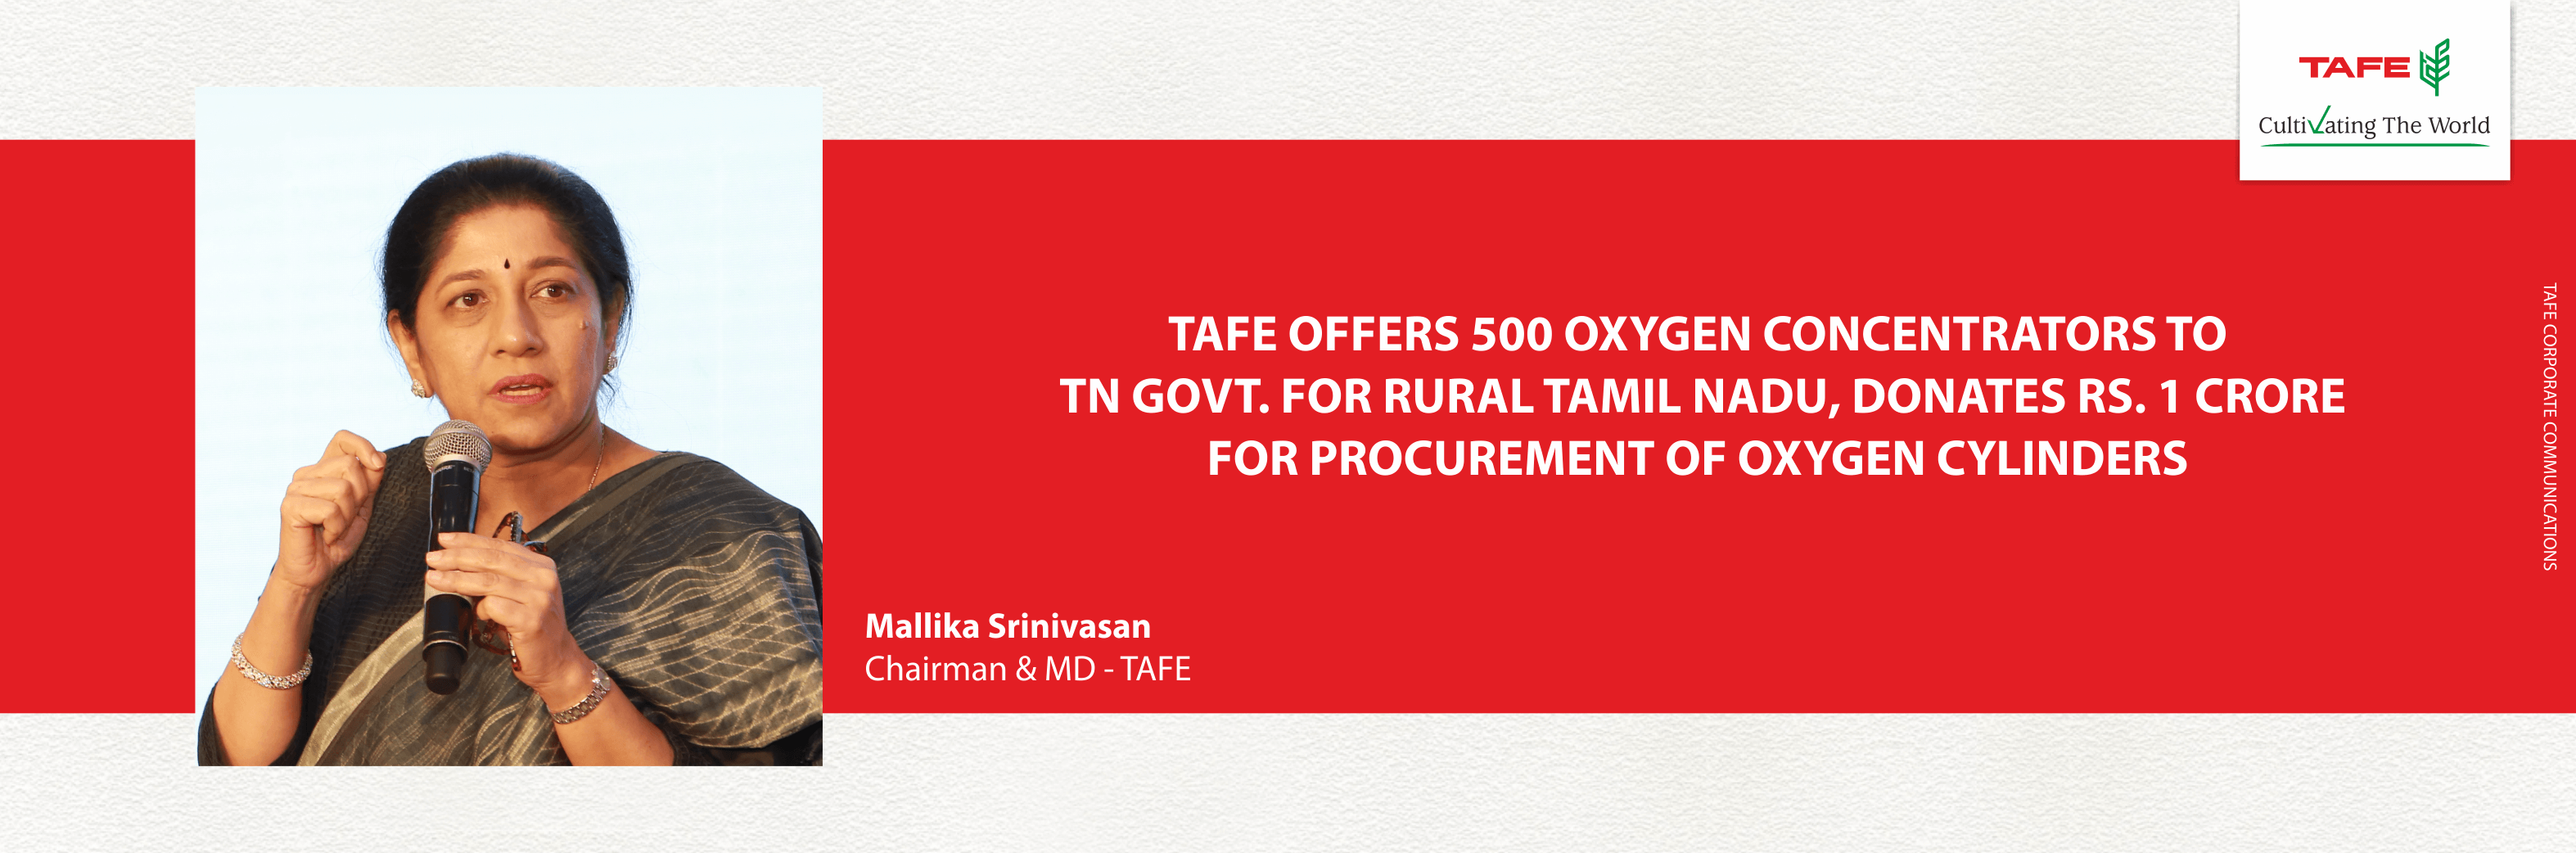 TAFE Offers 500 Oxygen Concentrators to TN Govt. for Rural Tamil Nadu. Donates Rs. 1 Crore for Procurement of Oxygen Cylinders.